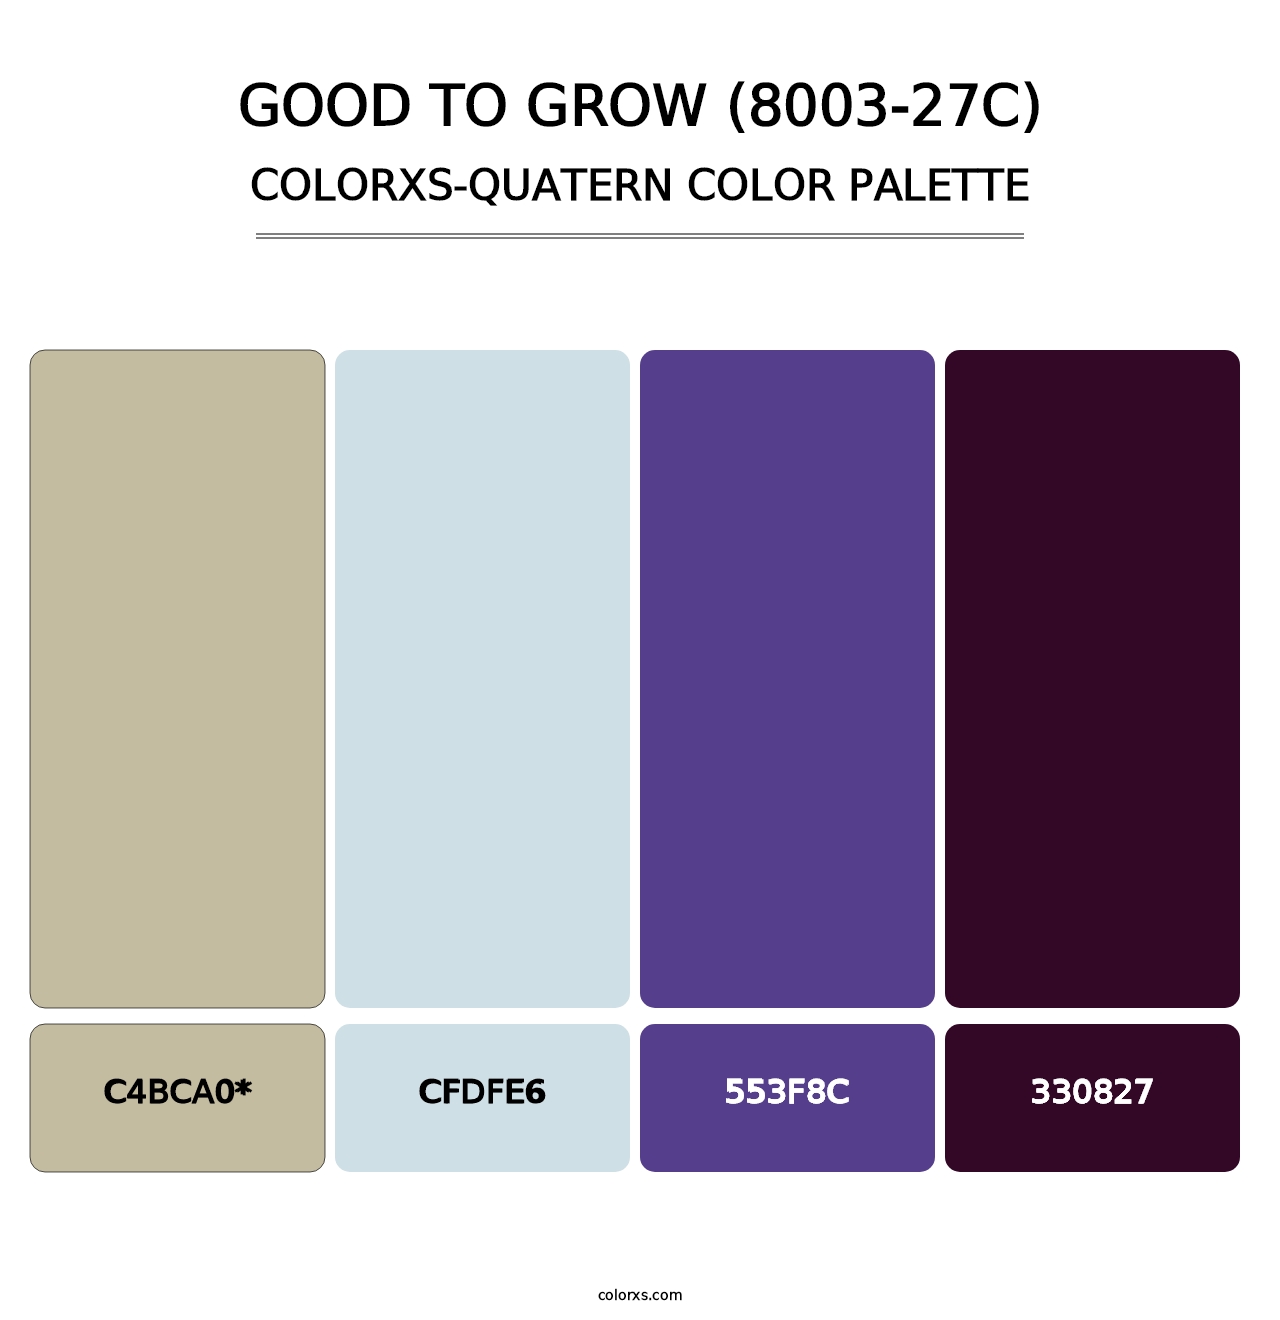 Good to Grow (8003-27C) - Colorxs Quatern Palette